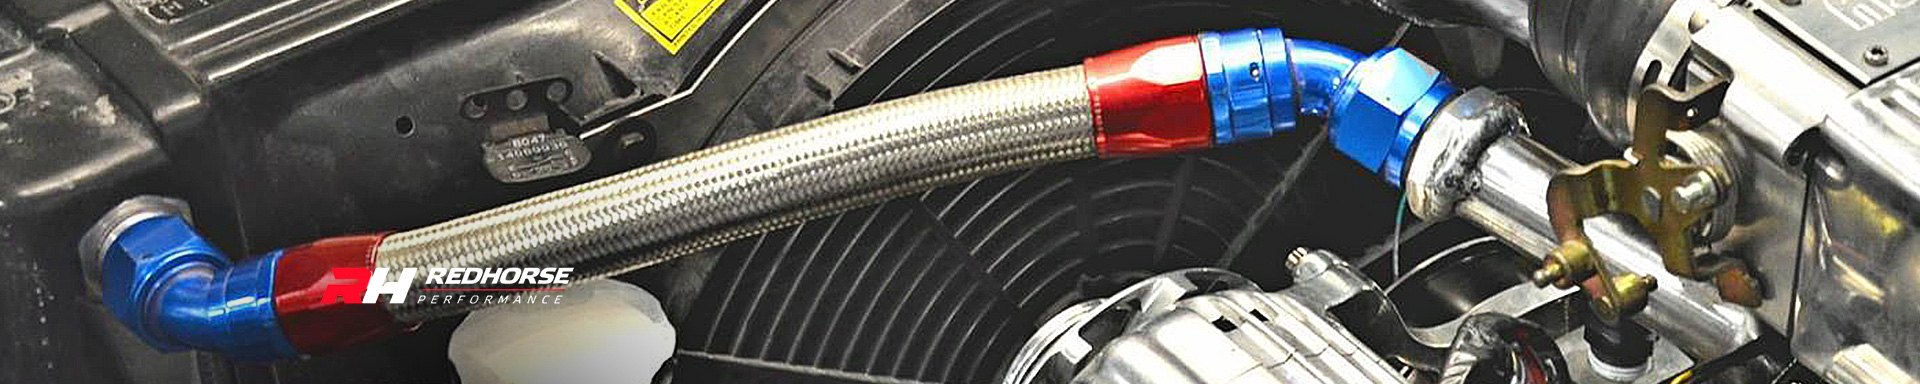 Redhorse Performance Wrenches